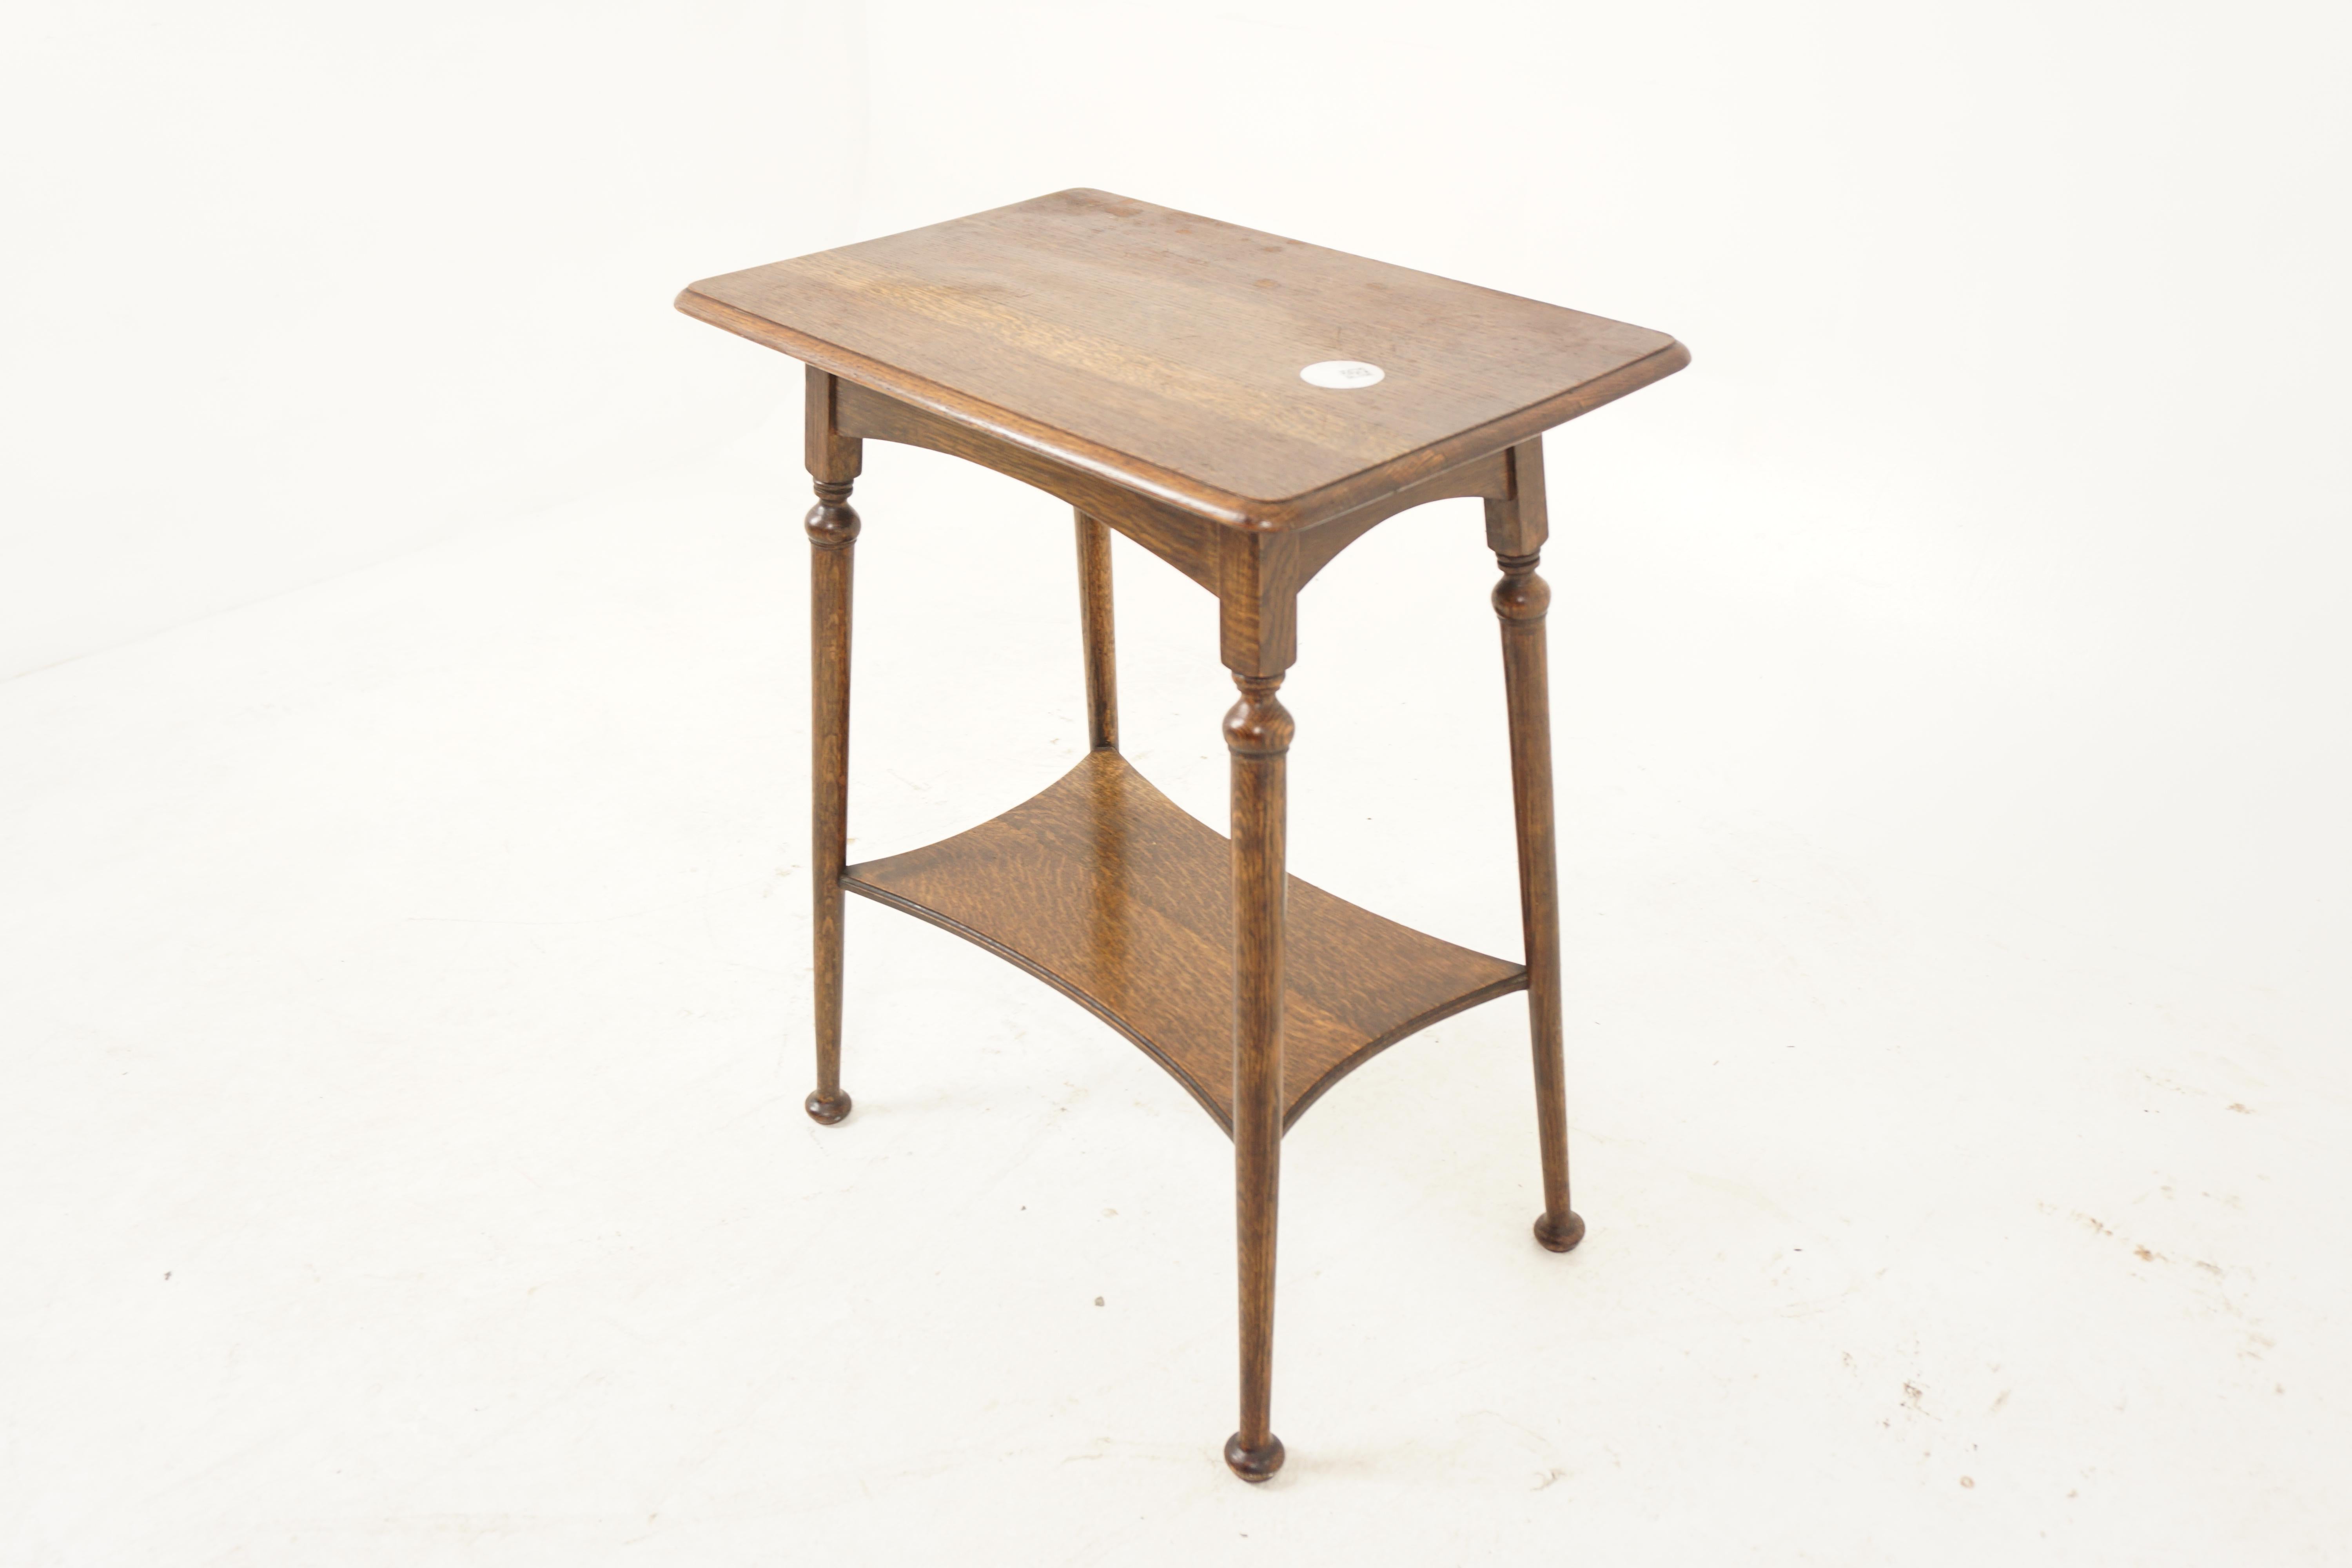 Vintage Oak Table, Arts and Crafts Oak Two Tier End Table, Lamp Table, Antique Furniture, Scotland 1910, H1068

+ Scotland 1910
+ Solid Oak
+ Original Finish
+ Rectangular mould top with bevelled edge
+ Shaped undershelf
+ All standing on